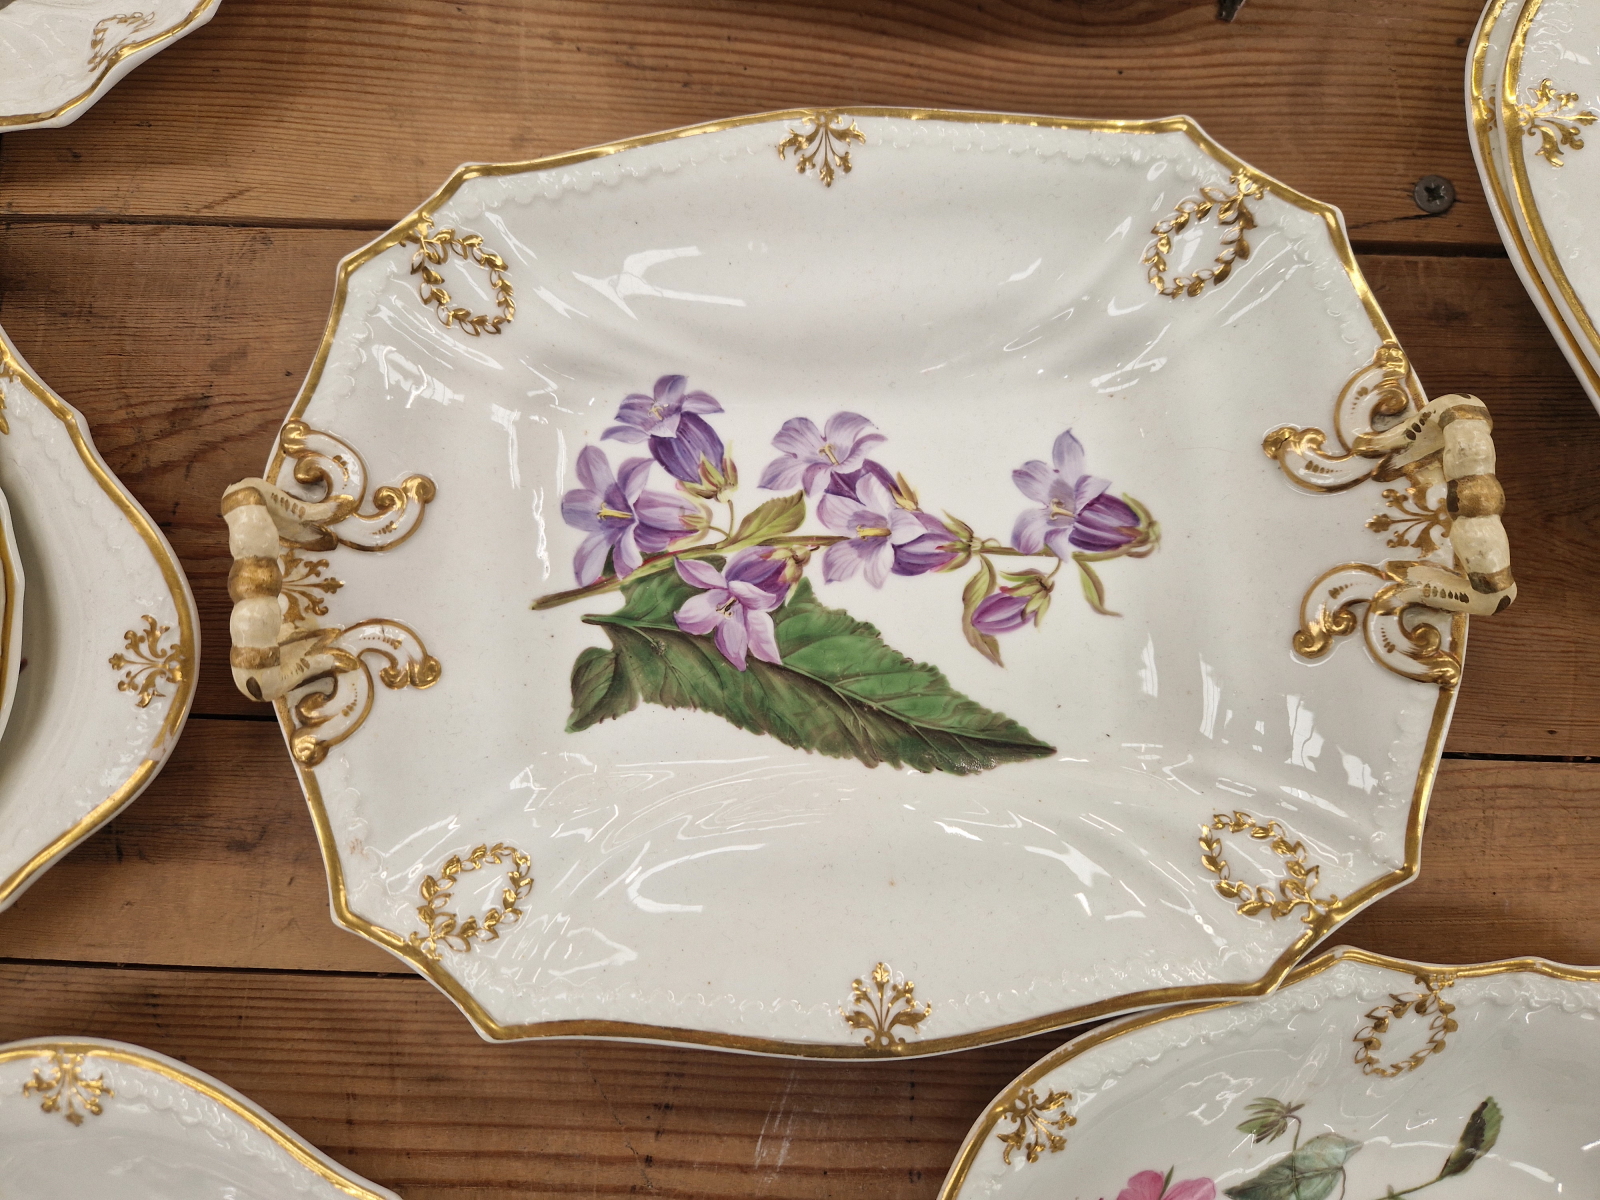 A FINE EARLY 19th C. PORCELAIN DESSERT SERVICE, HAND PAINTED WITH NAMED FLORAL BOTANICAL SPECIMENS - Image 8 of 58